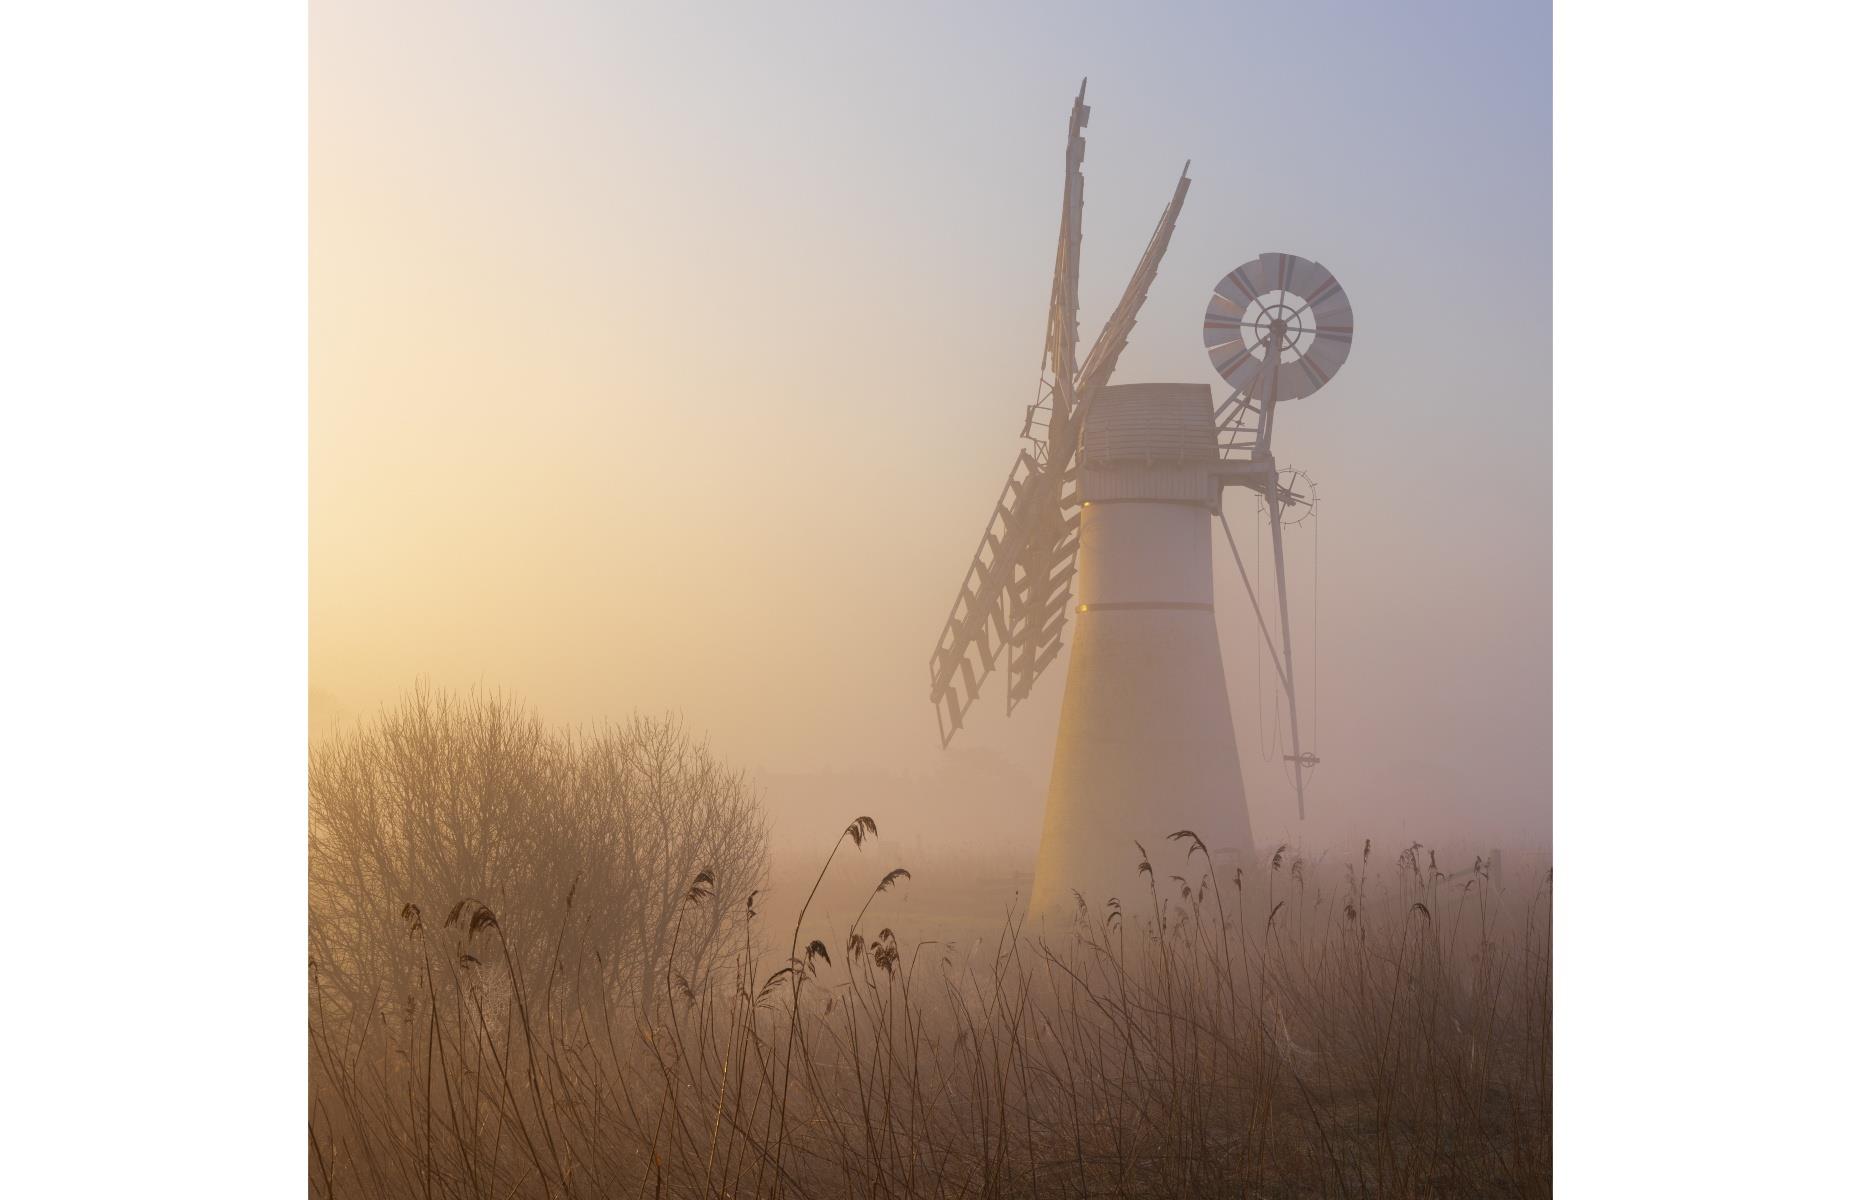 One of just a few historic wind-powered mills in the UK that remains intact, Thurne Mill is a drainage mill – designed to drain the marshes for farmers – and is now over 200 years old. Photographer Jay Birmingham was shortlisted for this gorgeous image, which he captured "at dawn, with the soft glow of the rising sun lighting it up, diffused by the morning mist."